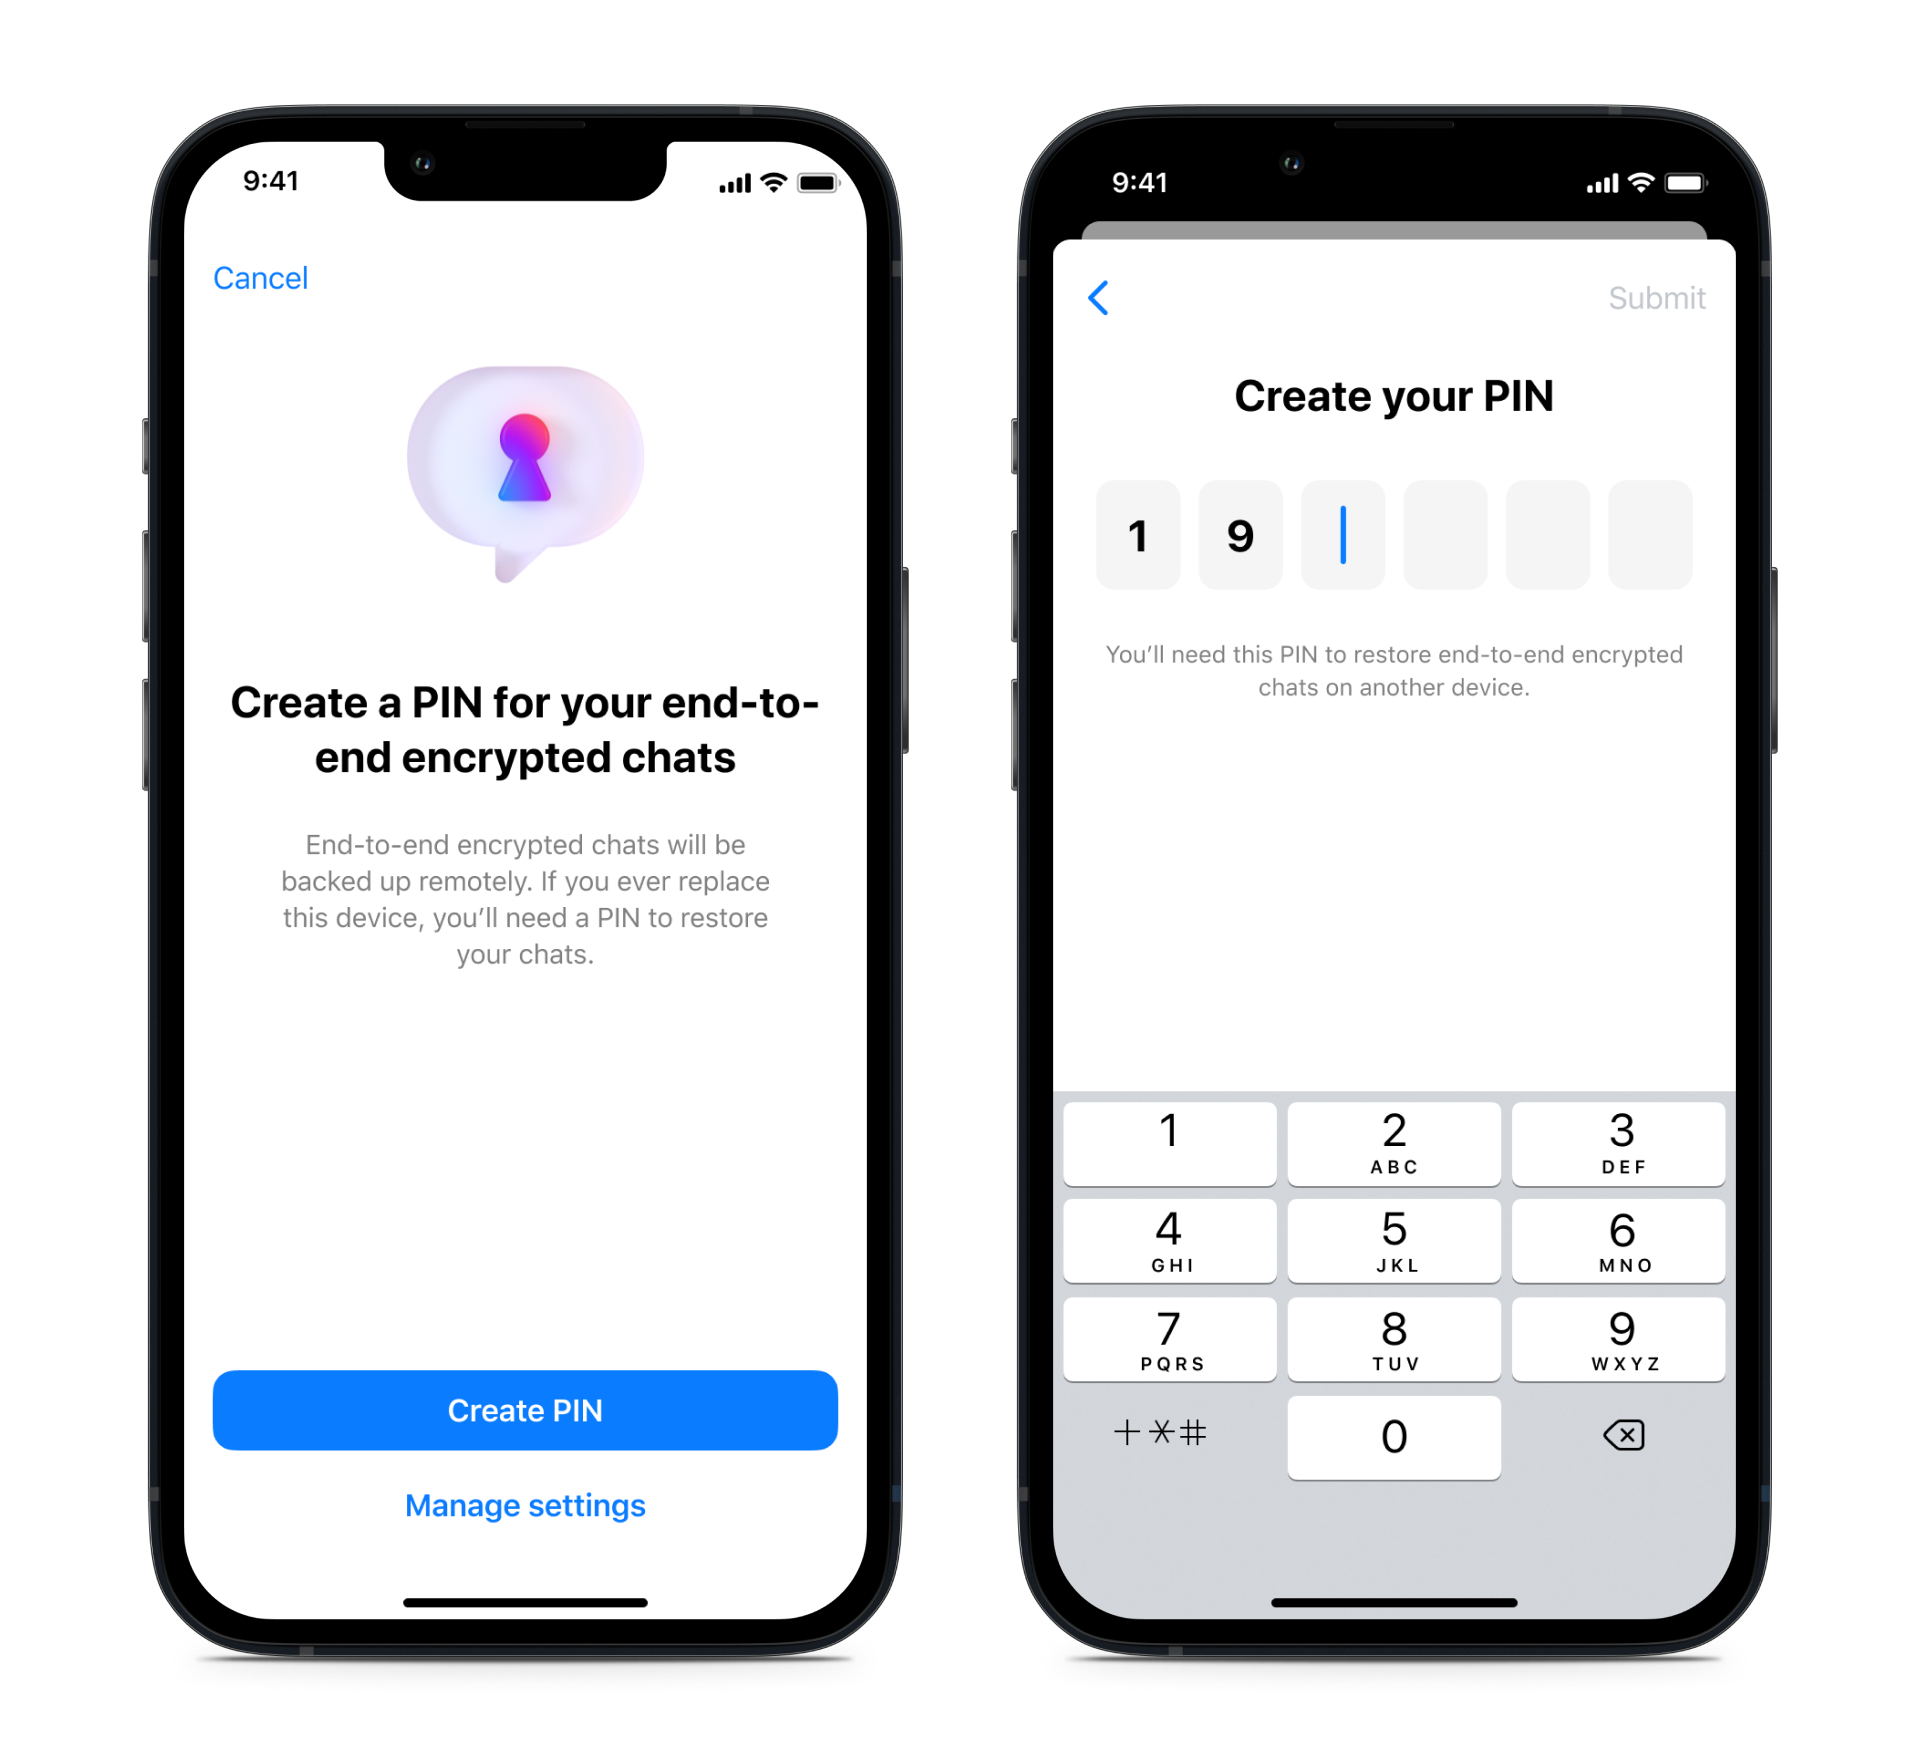 An iPhone showing a prompt on Messenger to create a PIN for end-to-end encrypted chats.